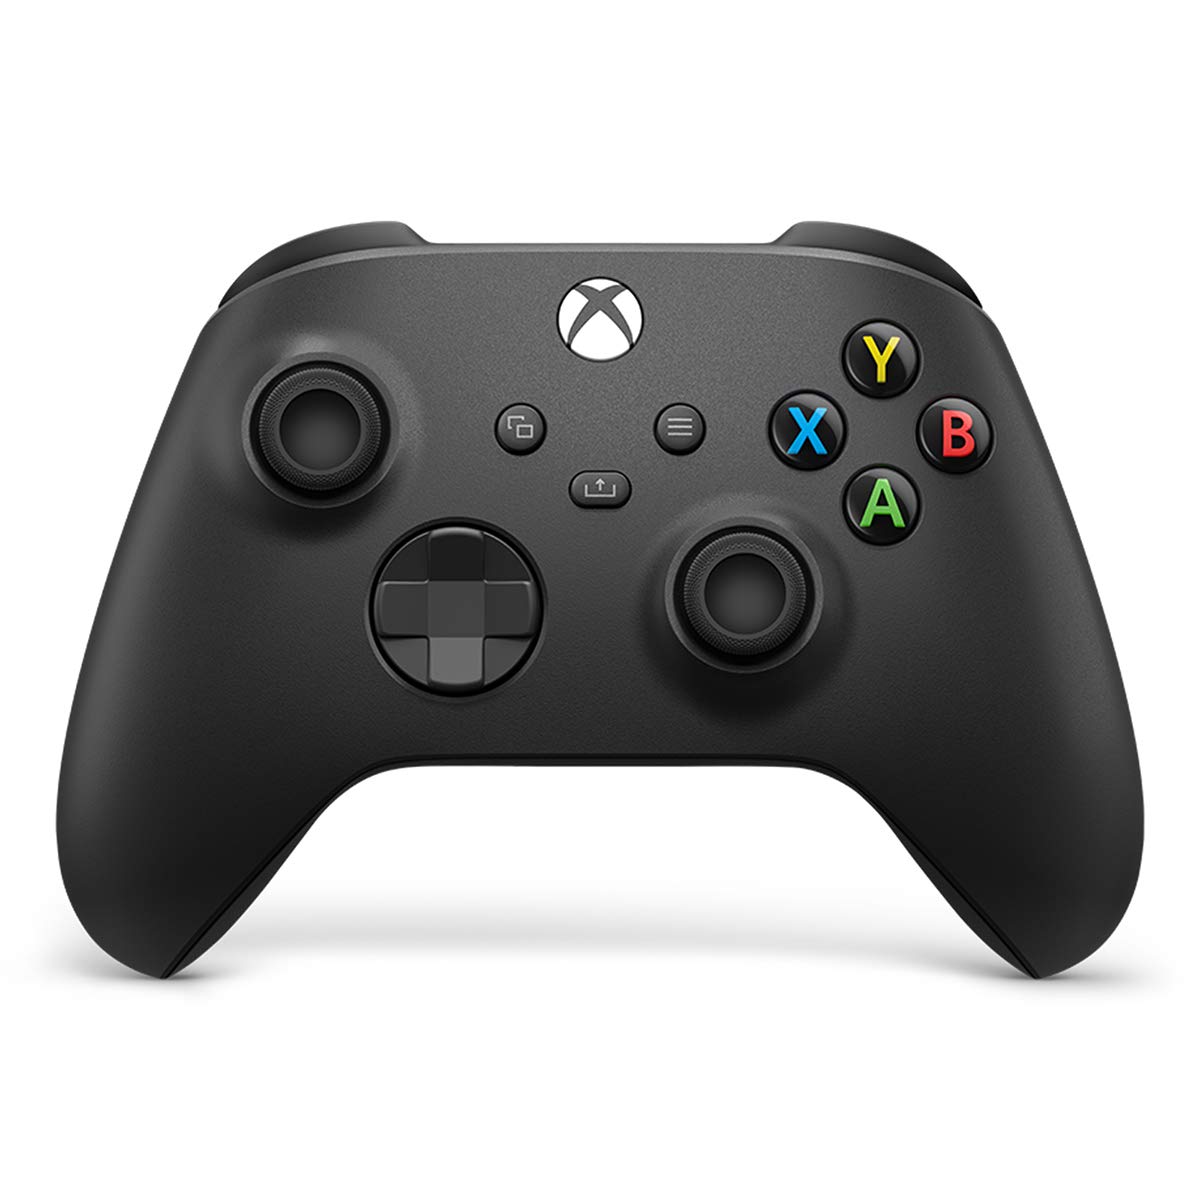 Microsoft Wireless Controller for Xbox Series X/S - Carbon Black  889842611588